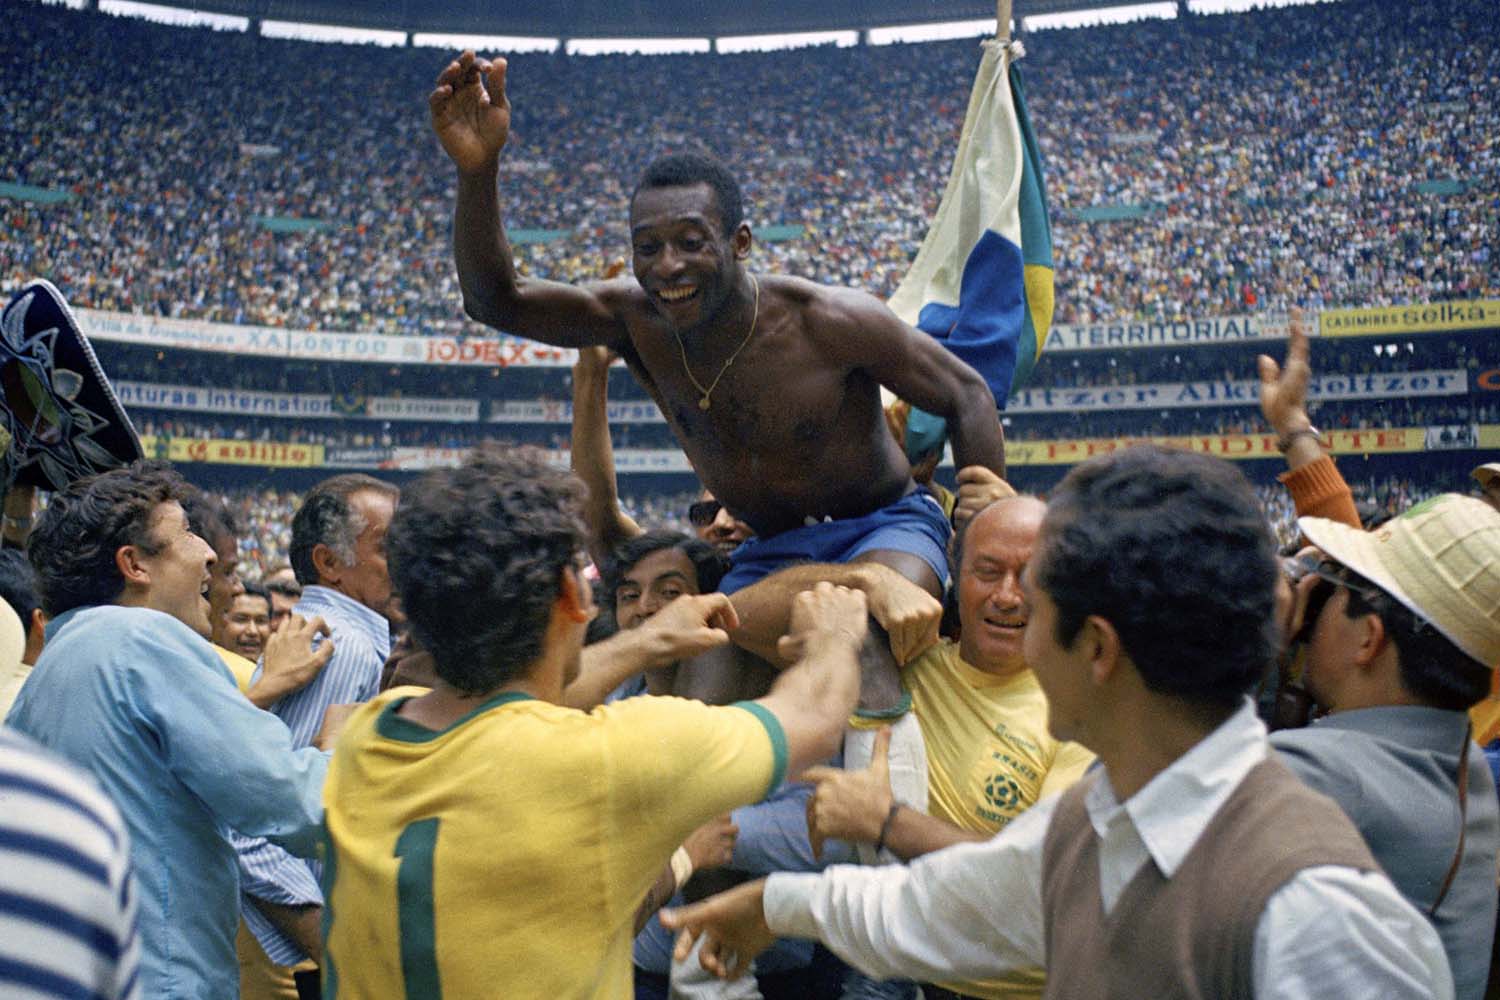 ** ADVANCE FOR WEEKEND EDITONS, MAY 29-30 ** FILE - In this June 21, 1970 file photo, Brazil's Pele is hoisted on shoulders of his teammates after Brazil won the World Cup final against Italy, 4-1, in Mexico City's Estadio Azteca. (AP Photo/File)